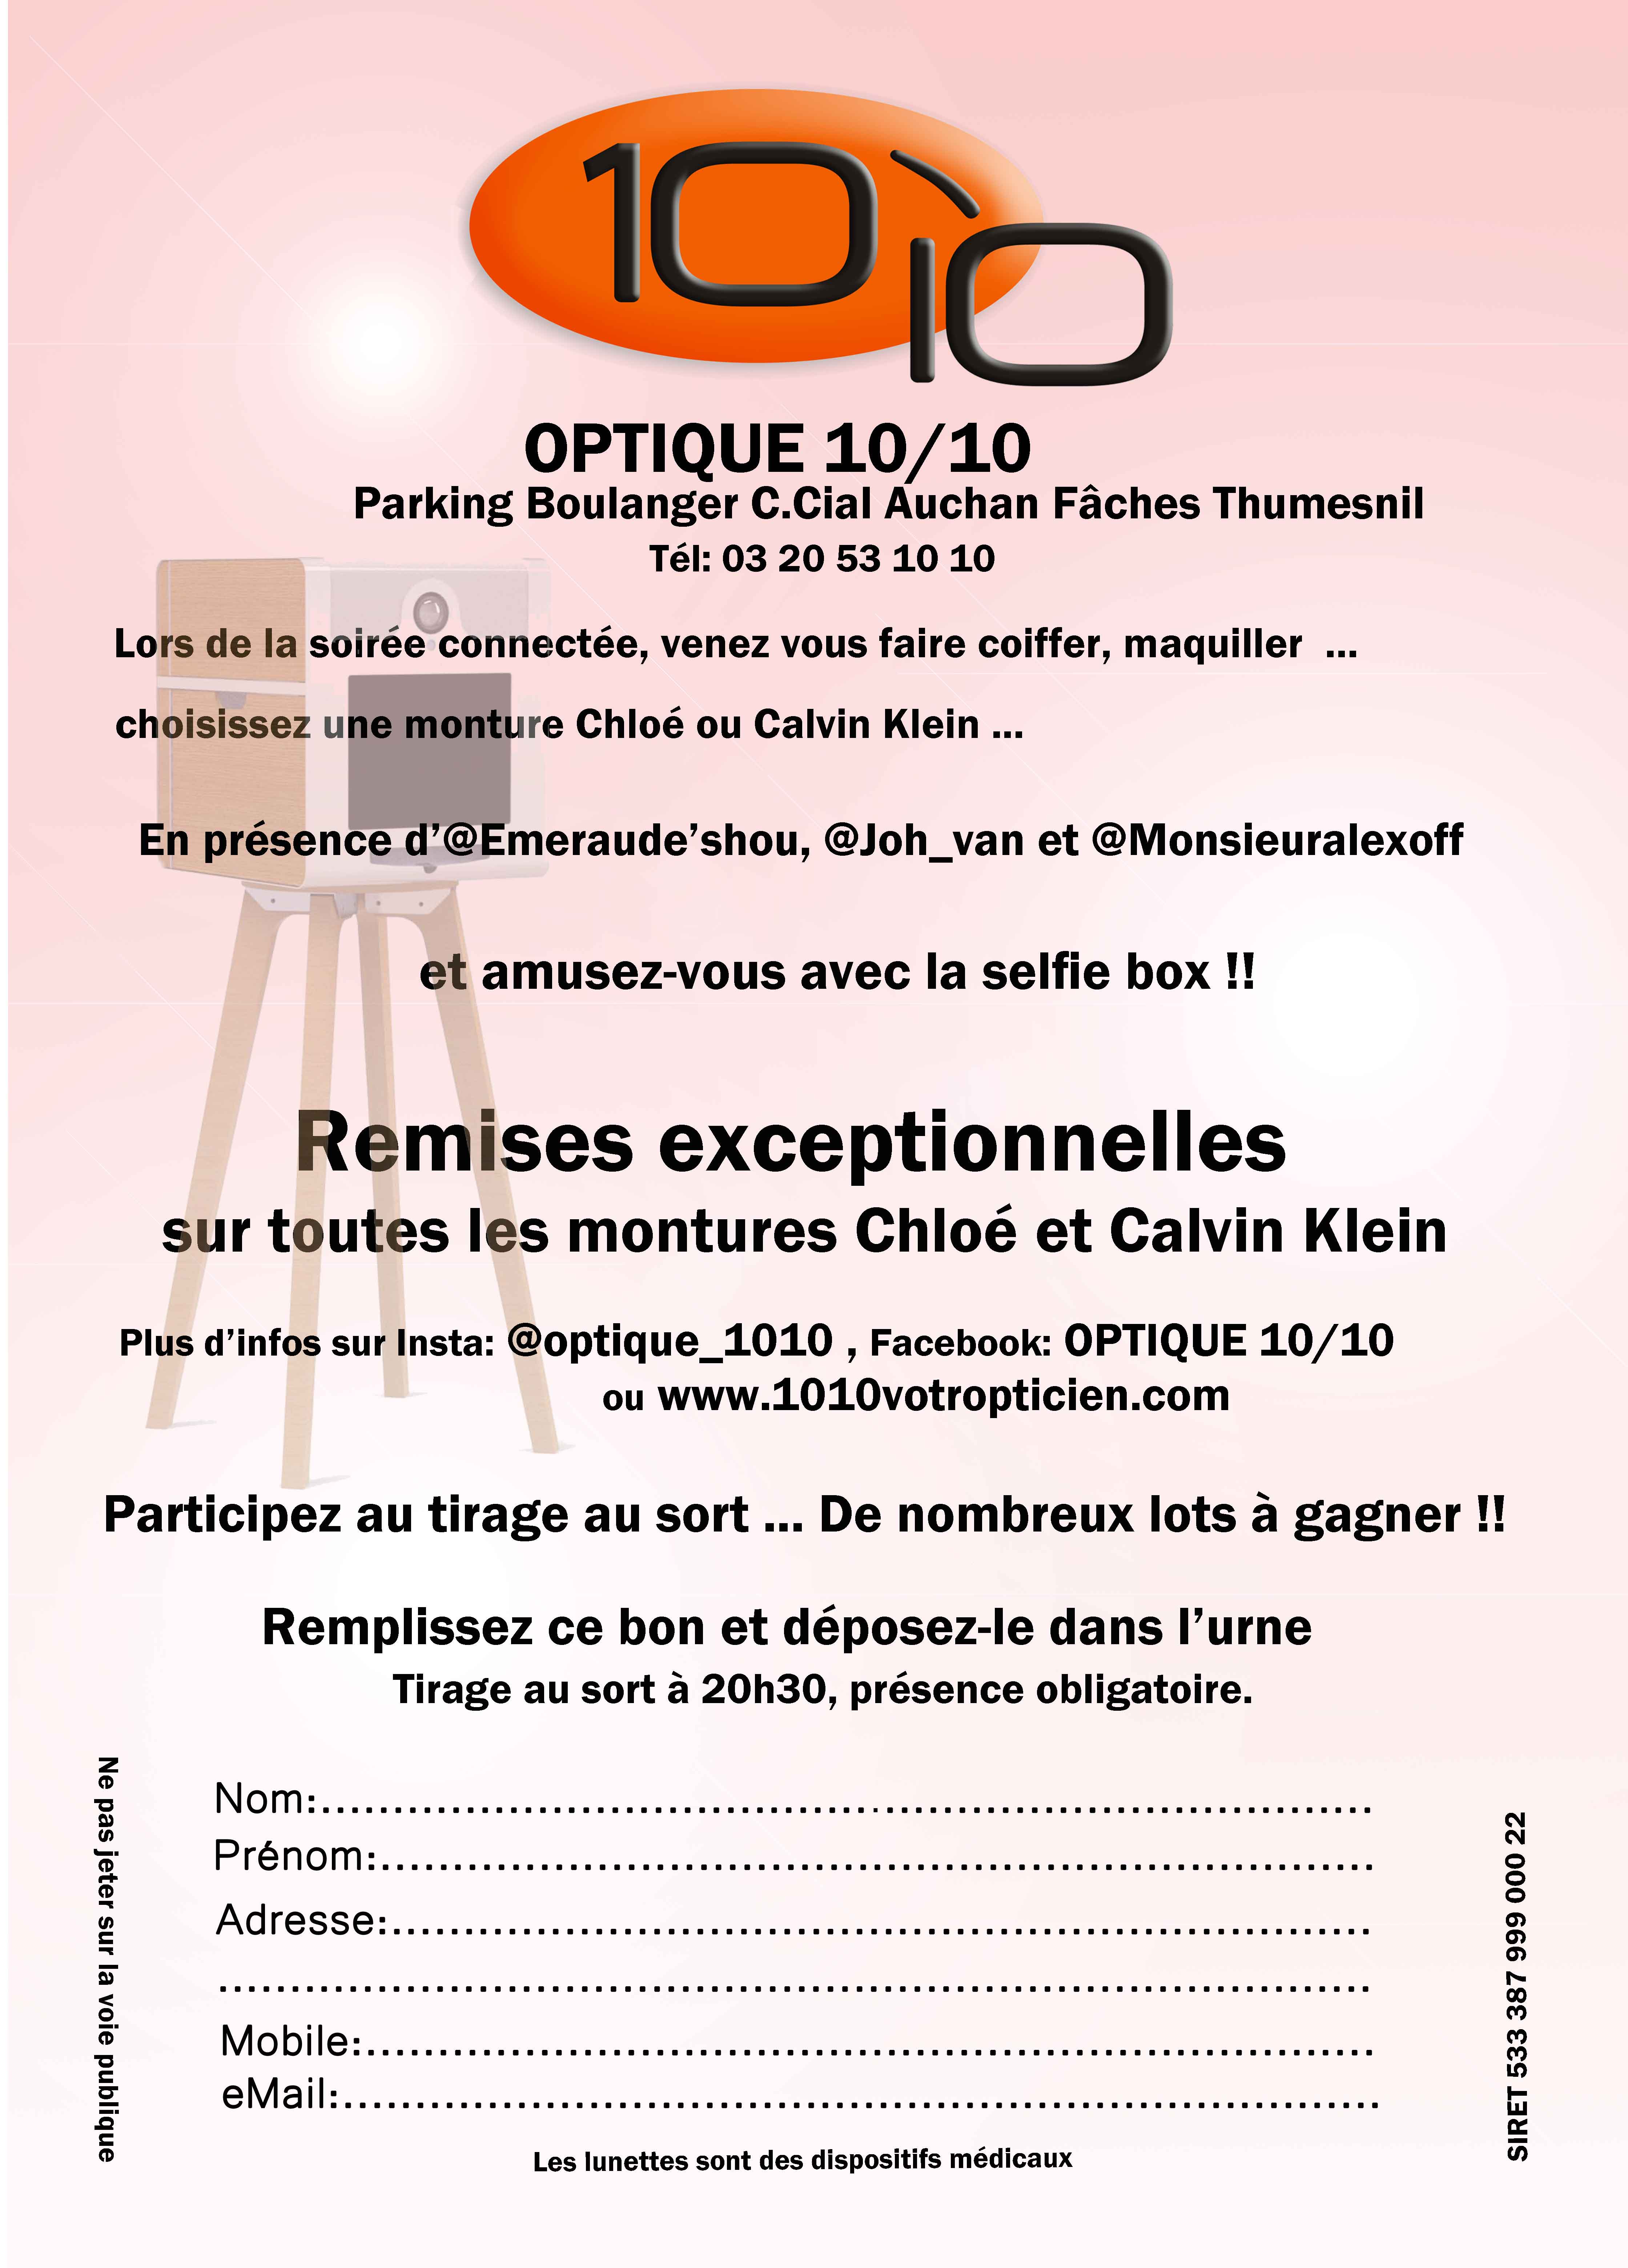 SOIREE CONNECTEE OPTIQUE 10/10-Fâches Thumesnil